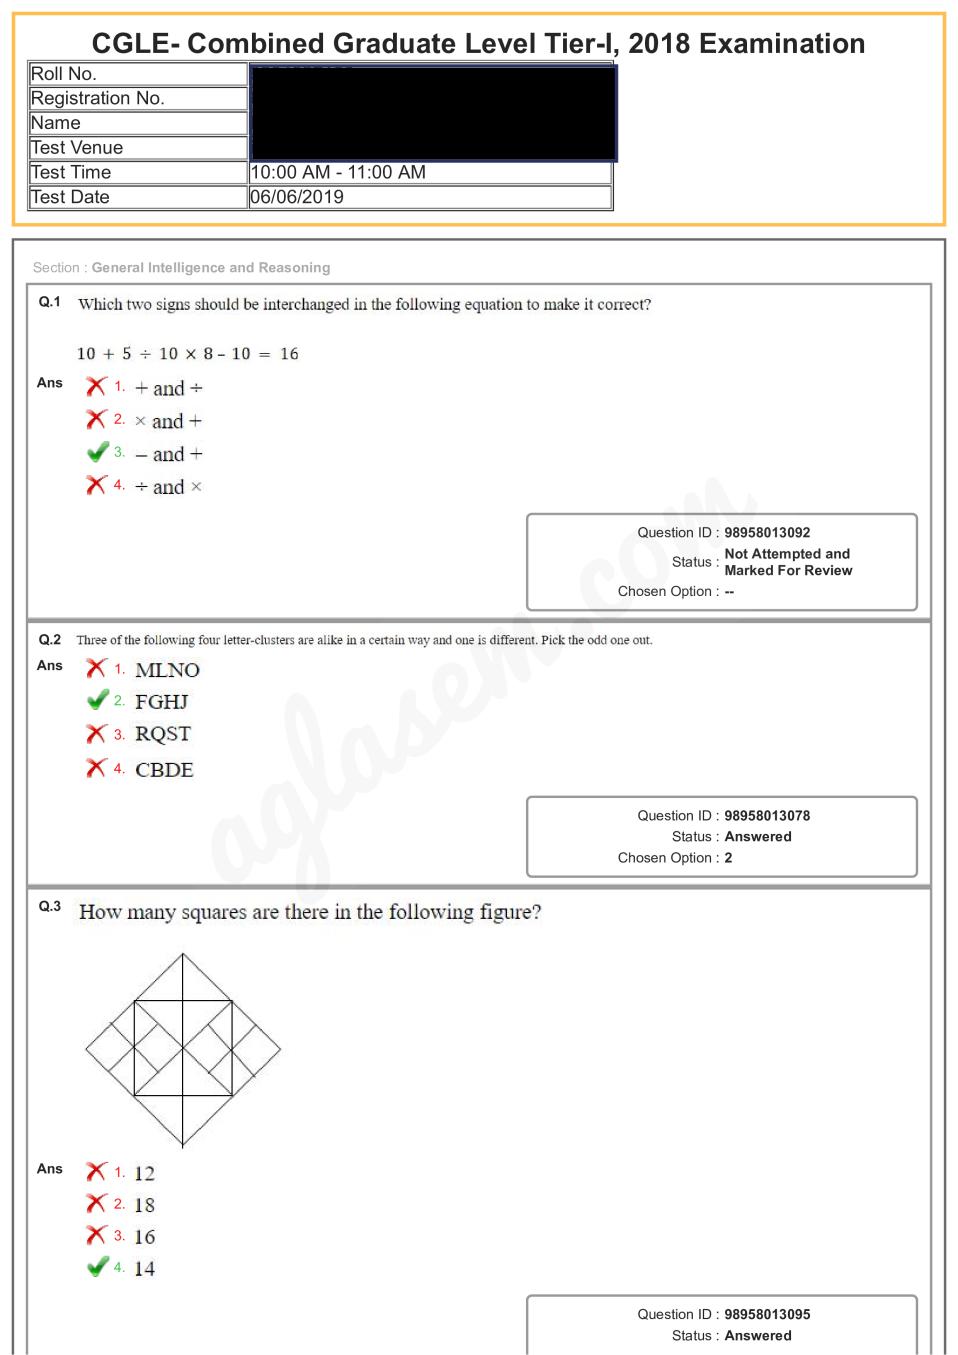 SSC CGL Question Paper Tier 1 2018 Exam - 06 jun 2019 first shift - Page 1